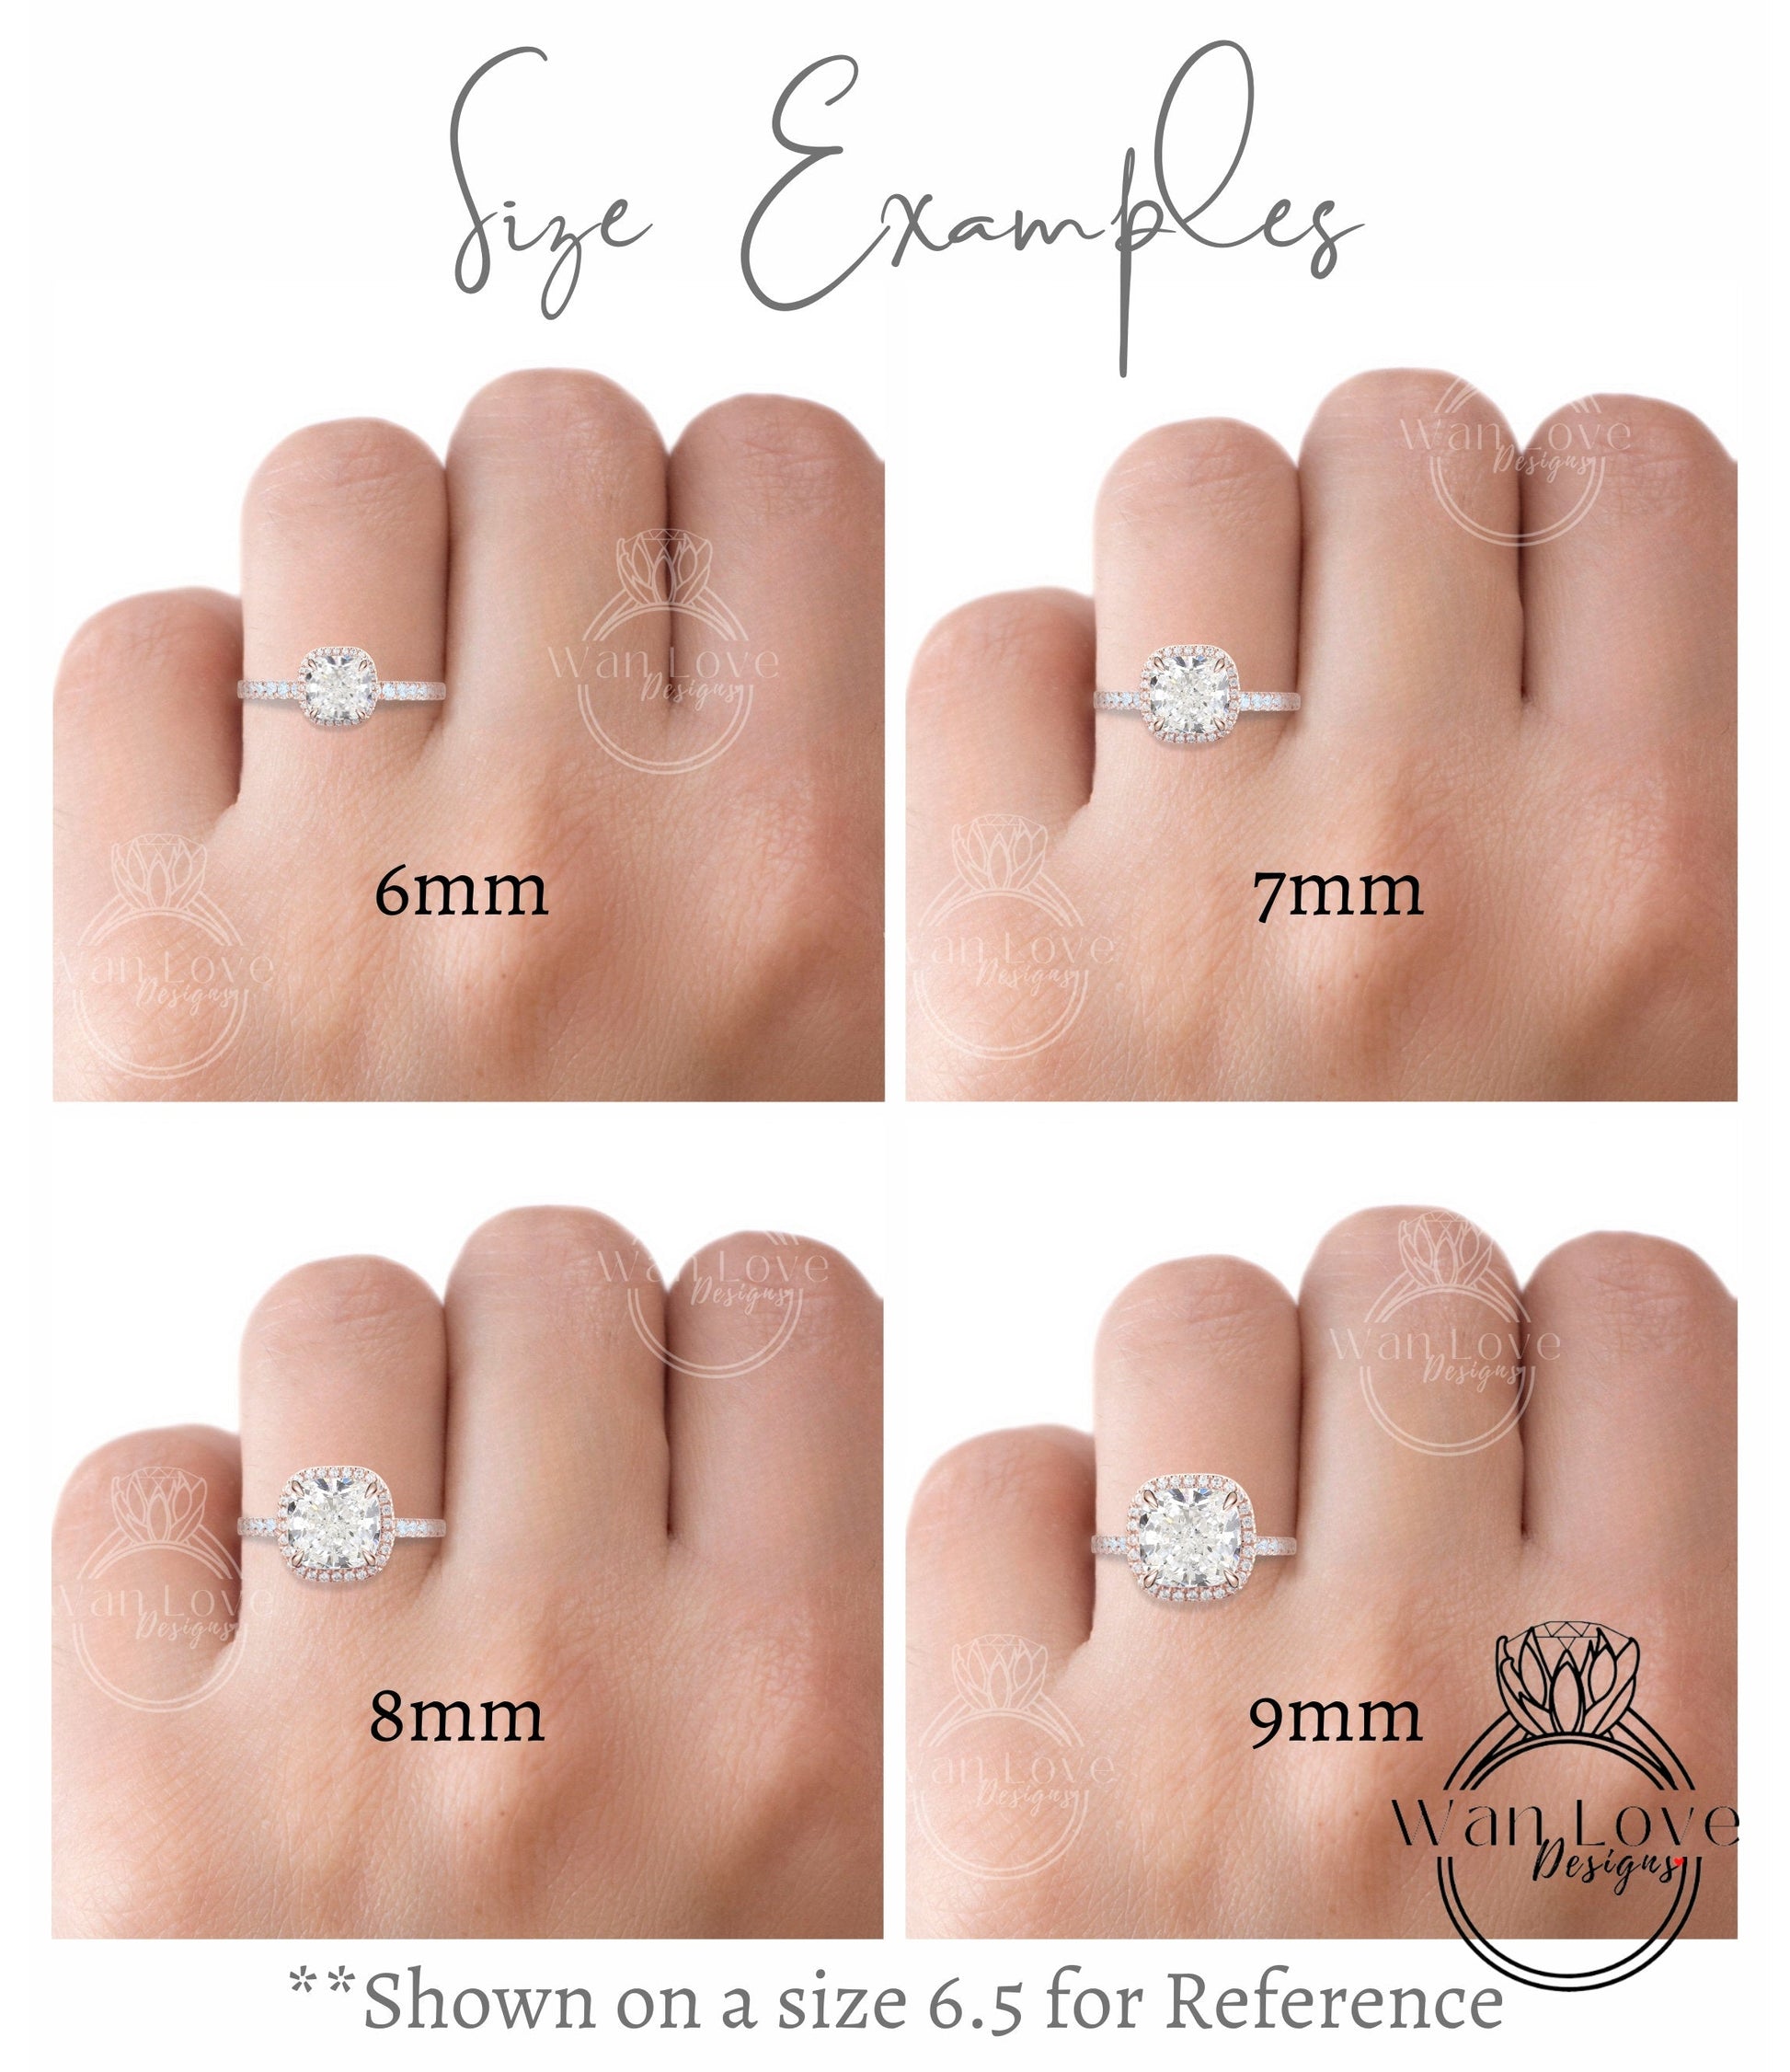 Salt & Pepper Diamond Cluster Half Halo engagement ring Diamonds Unique cluster round cut White Rose Gold Ring woman Promise Anniversary Gift Wan Love Designs